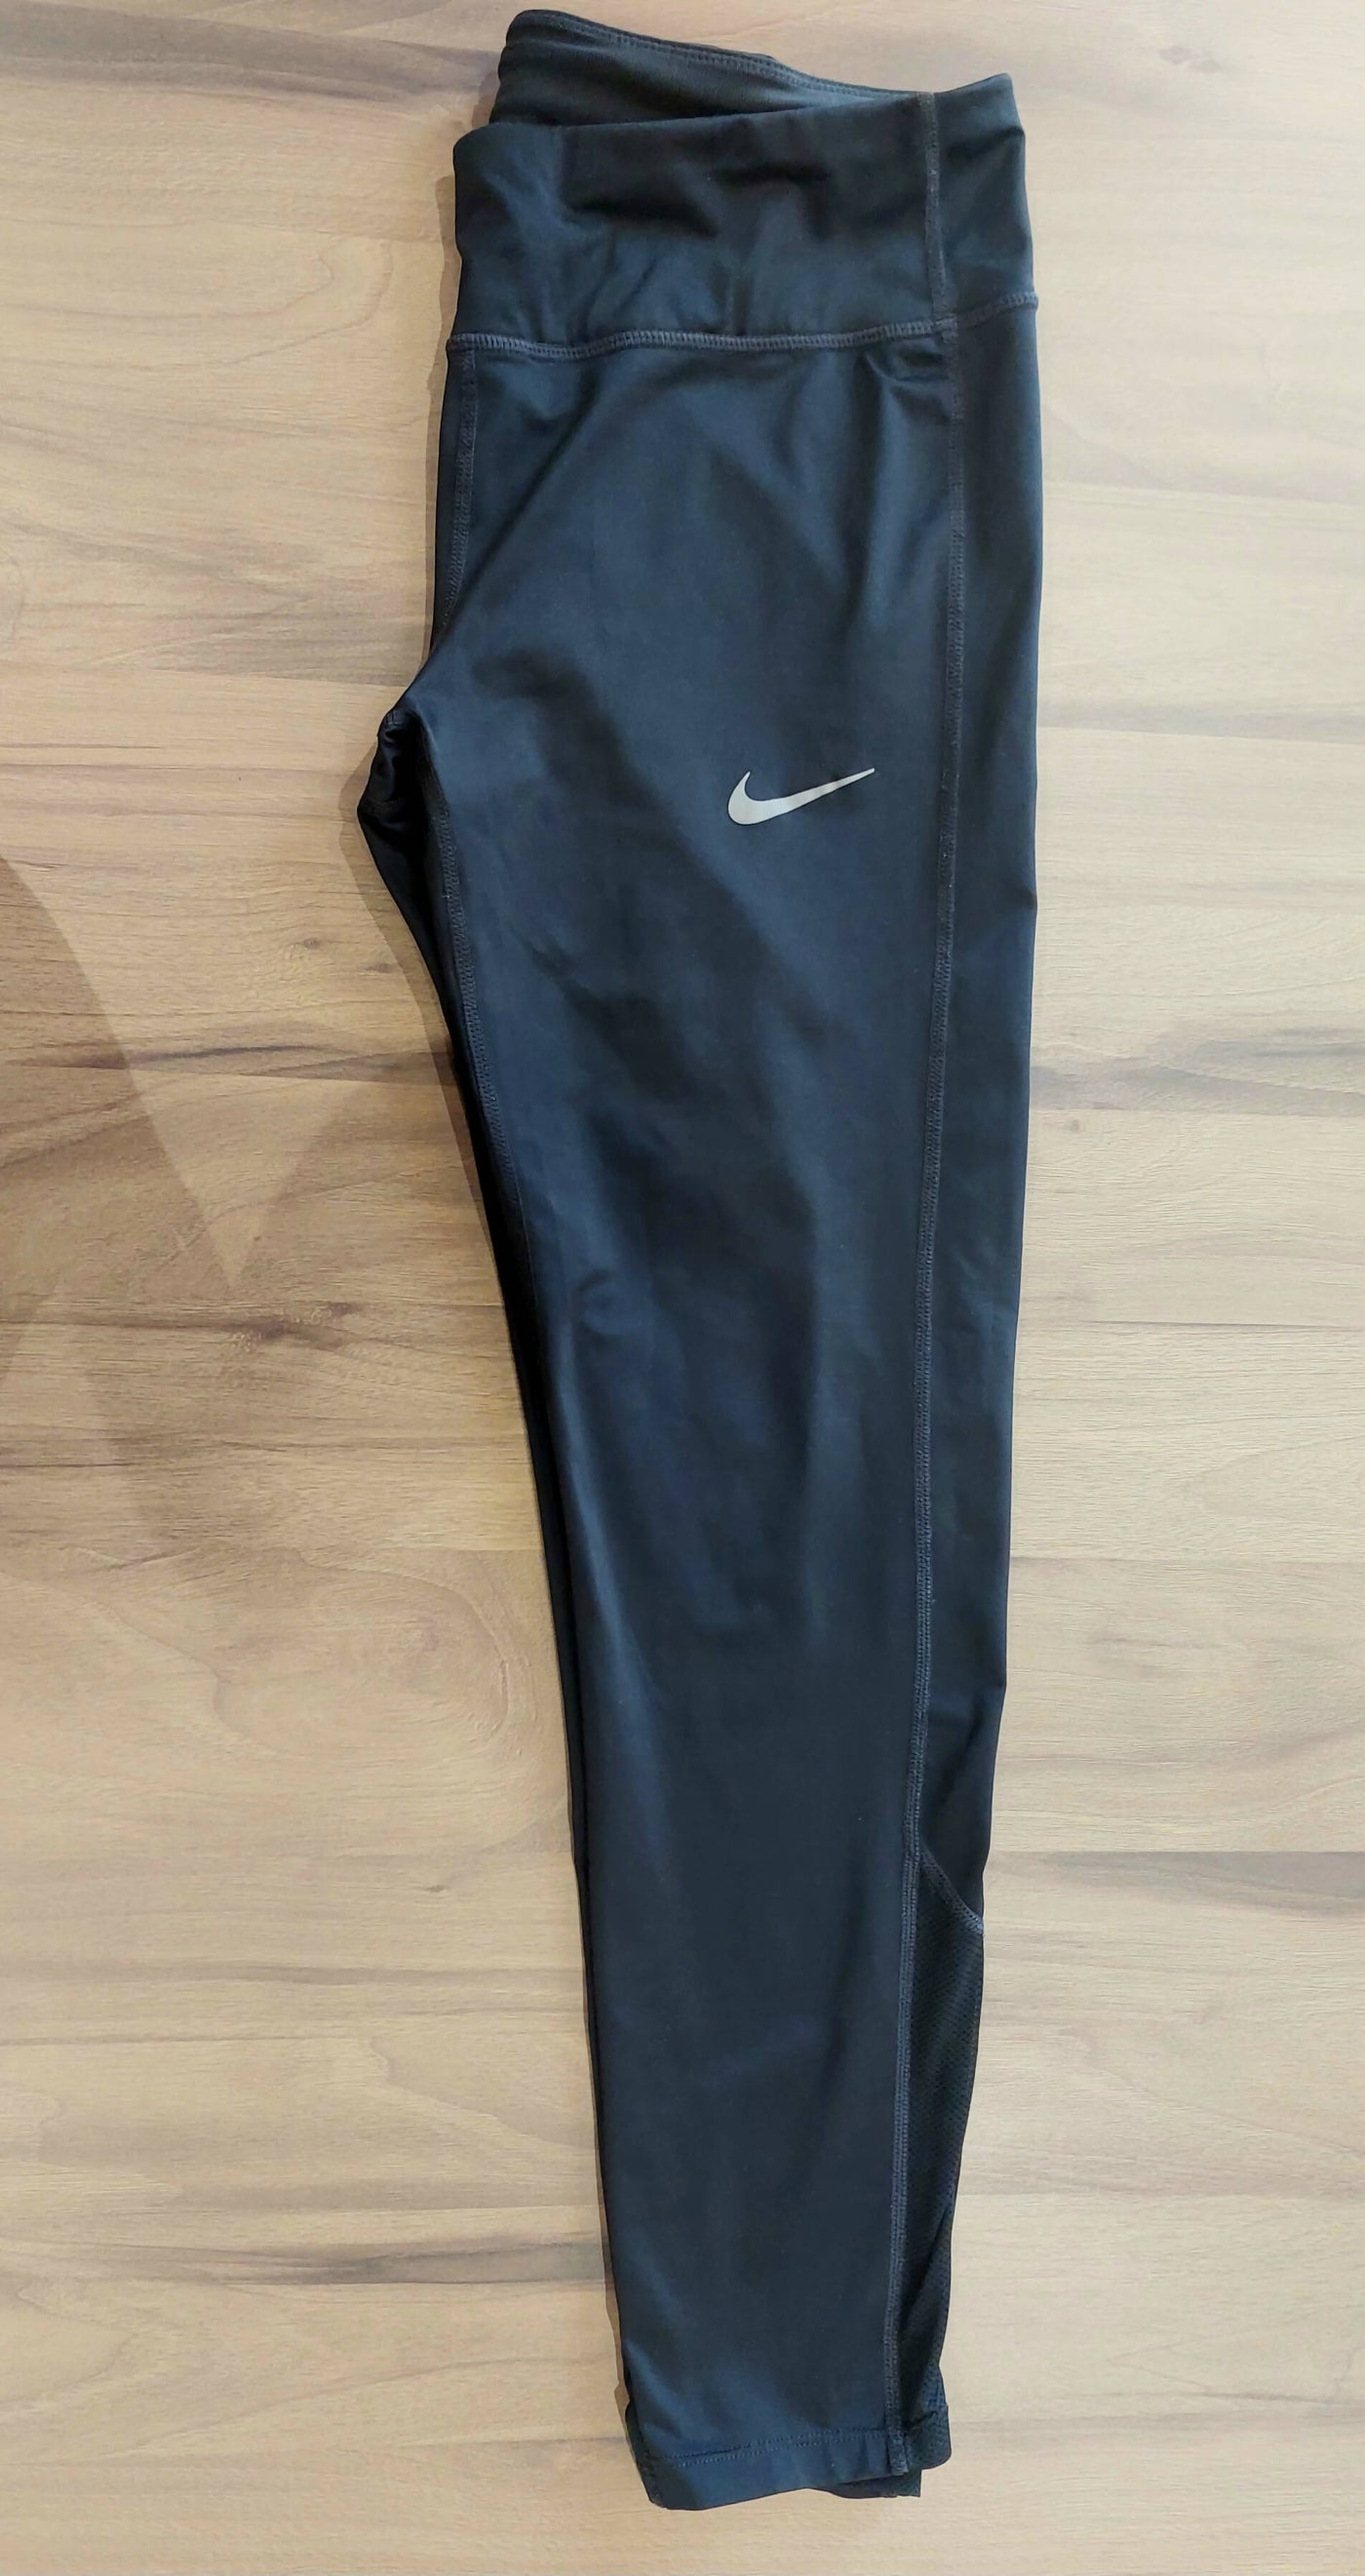 Nike Racer Tights